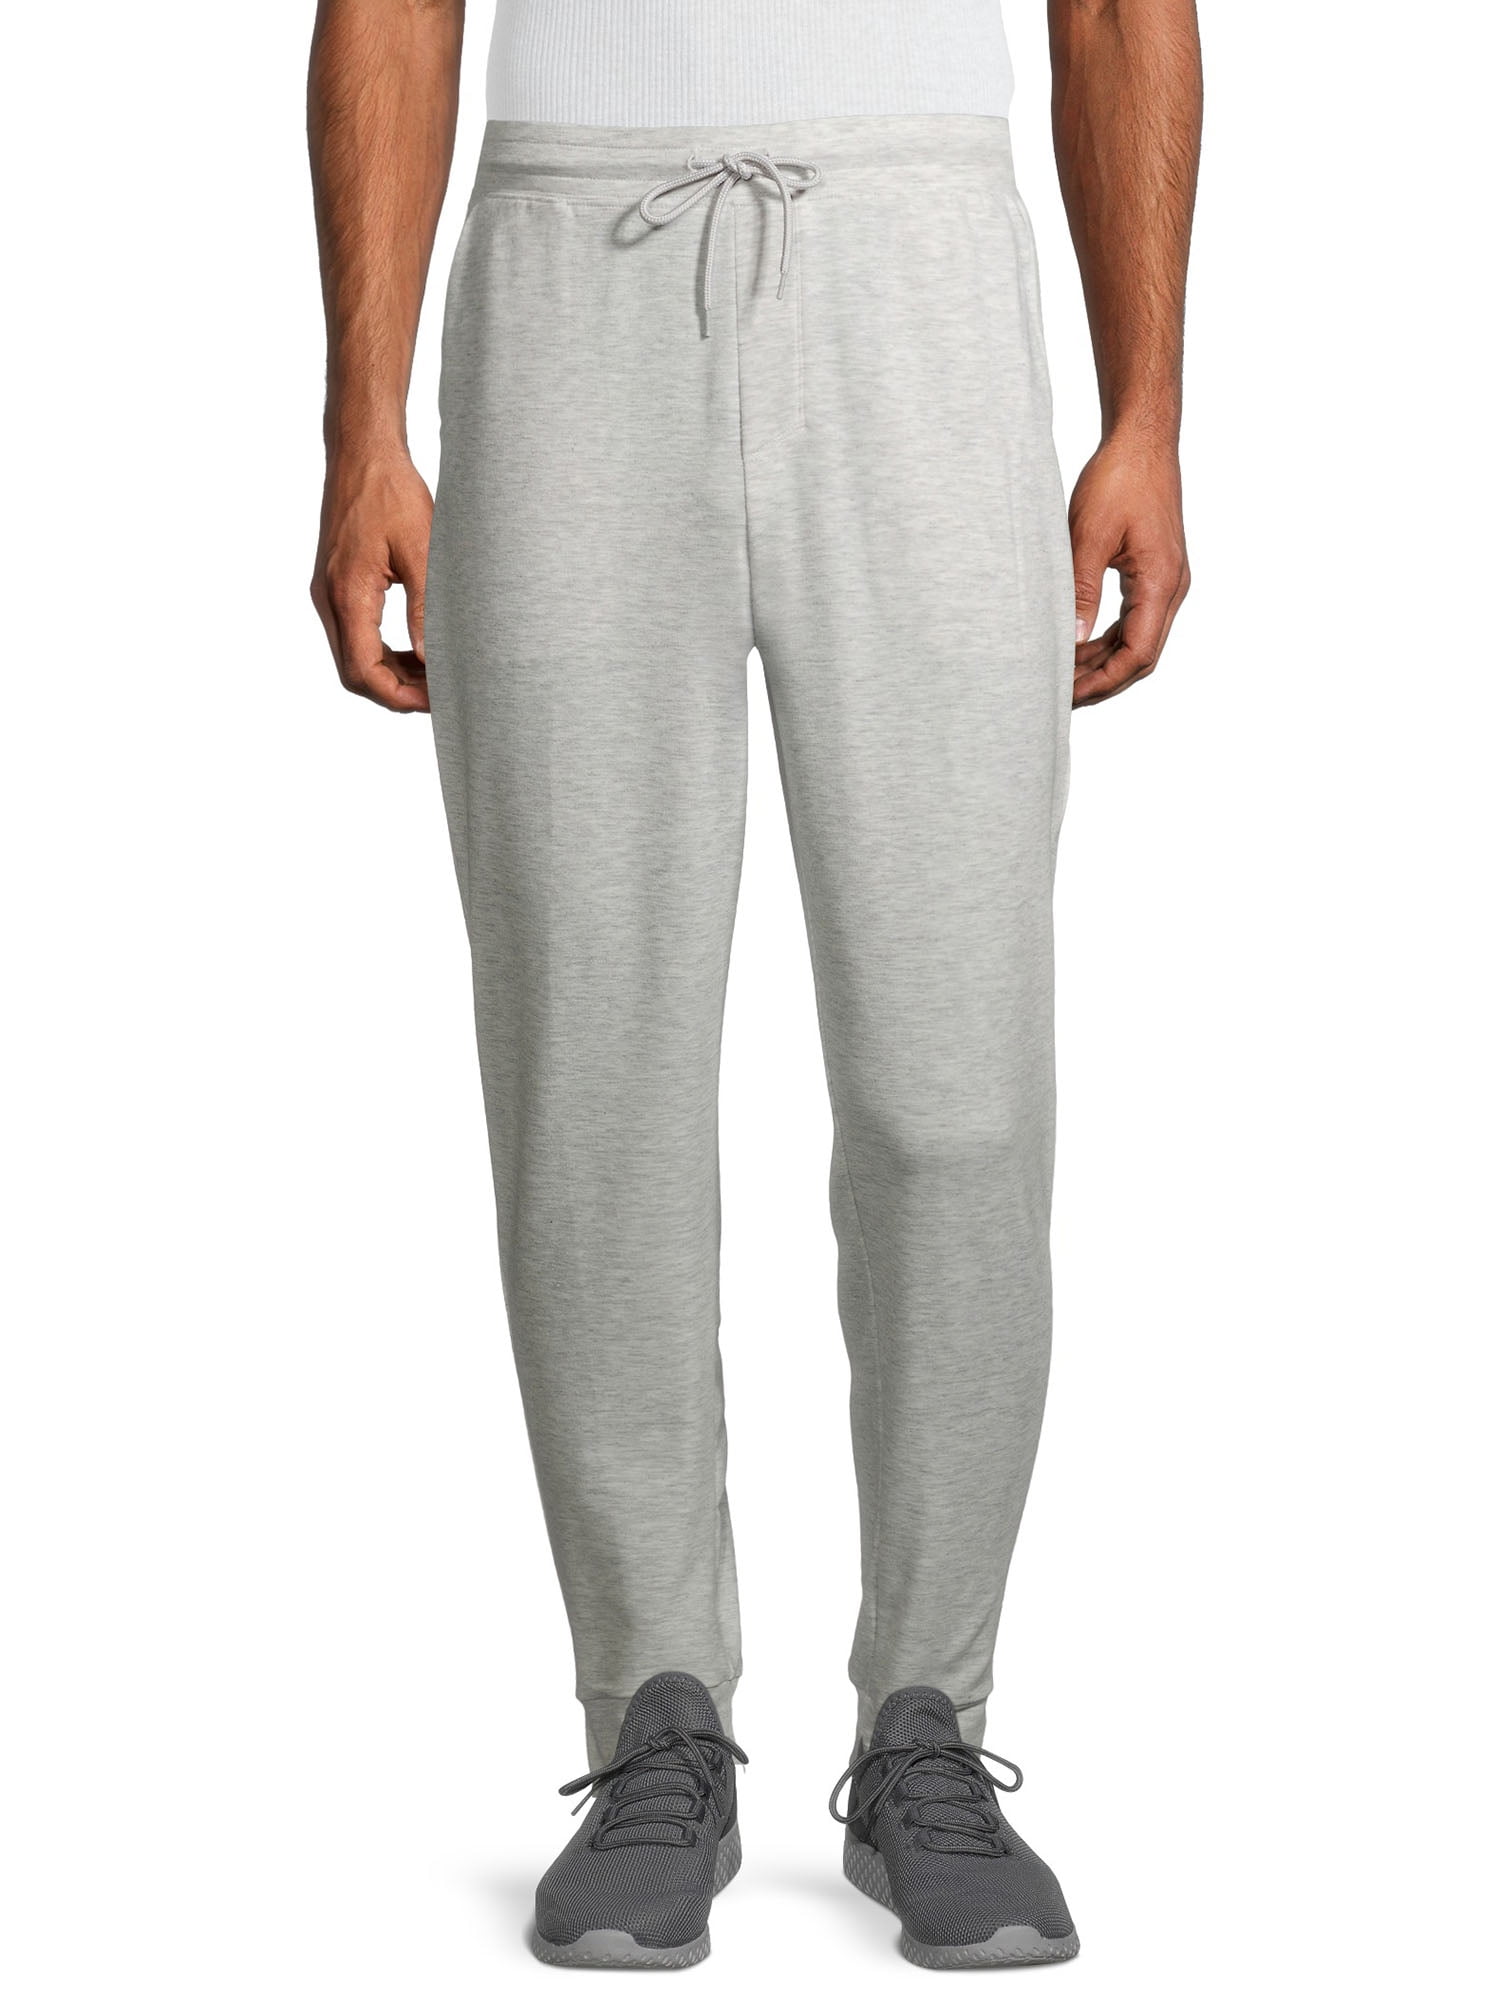 Athletic Works Men's and Big Men's Knit Joggers, up to 5XL 